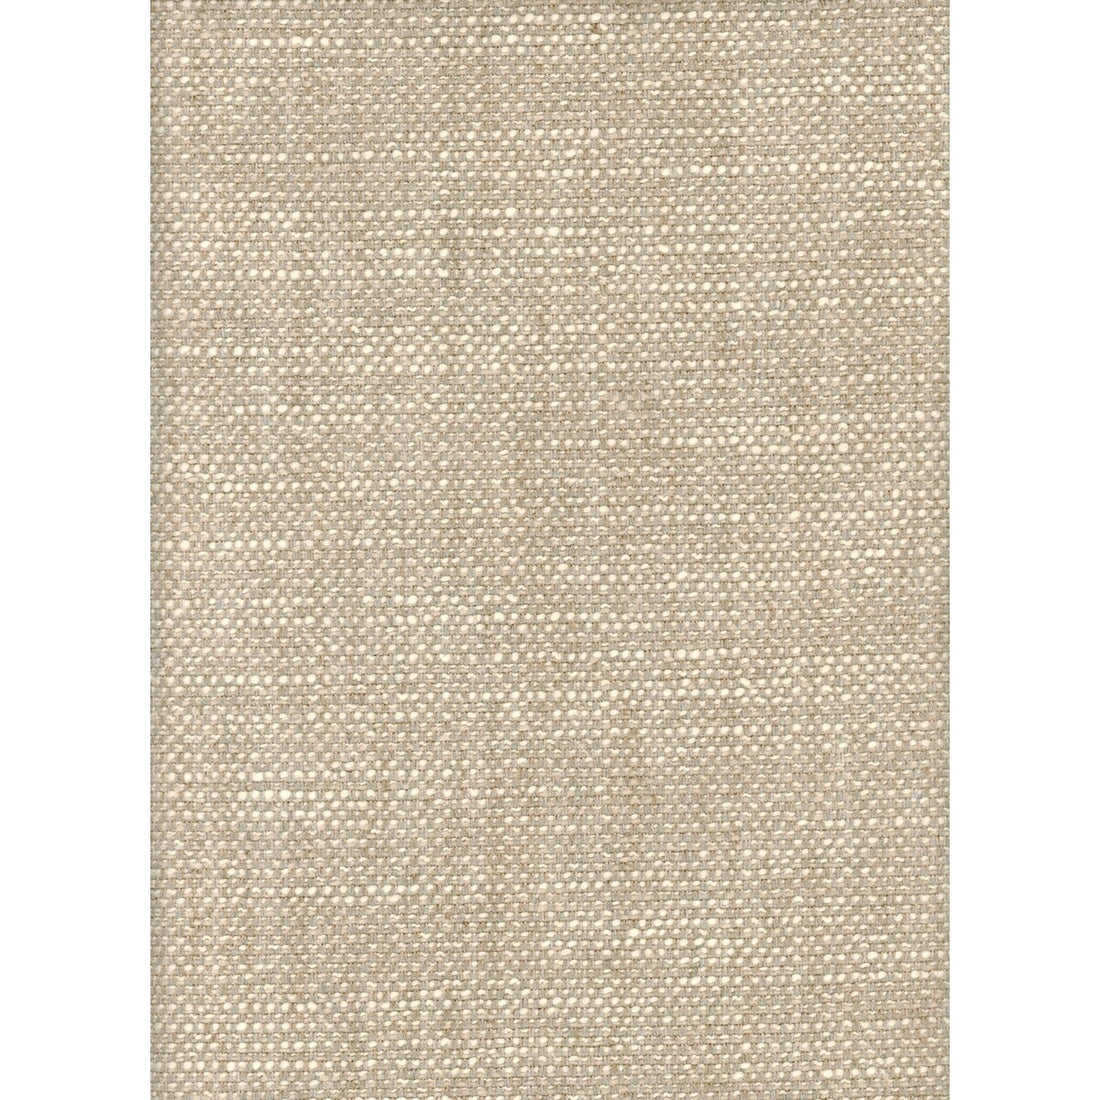 Paraggi fabric in oat color - pattern AM100299.1611.0 - by Kravet Couture in the Andrew Martin Portofino collection